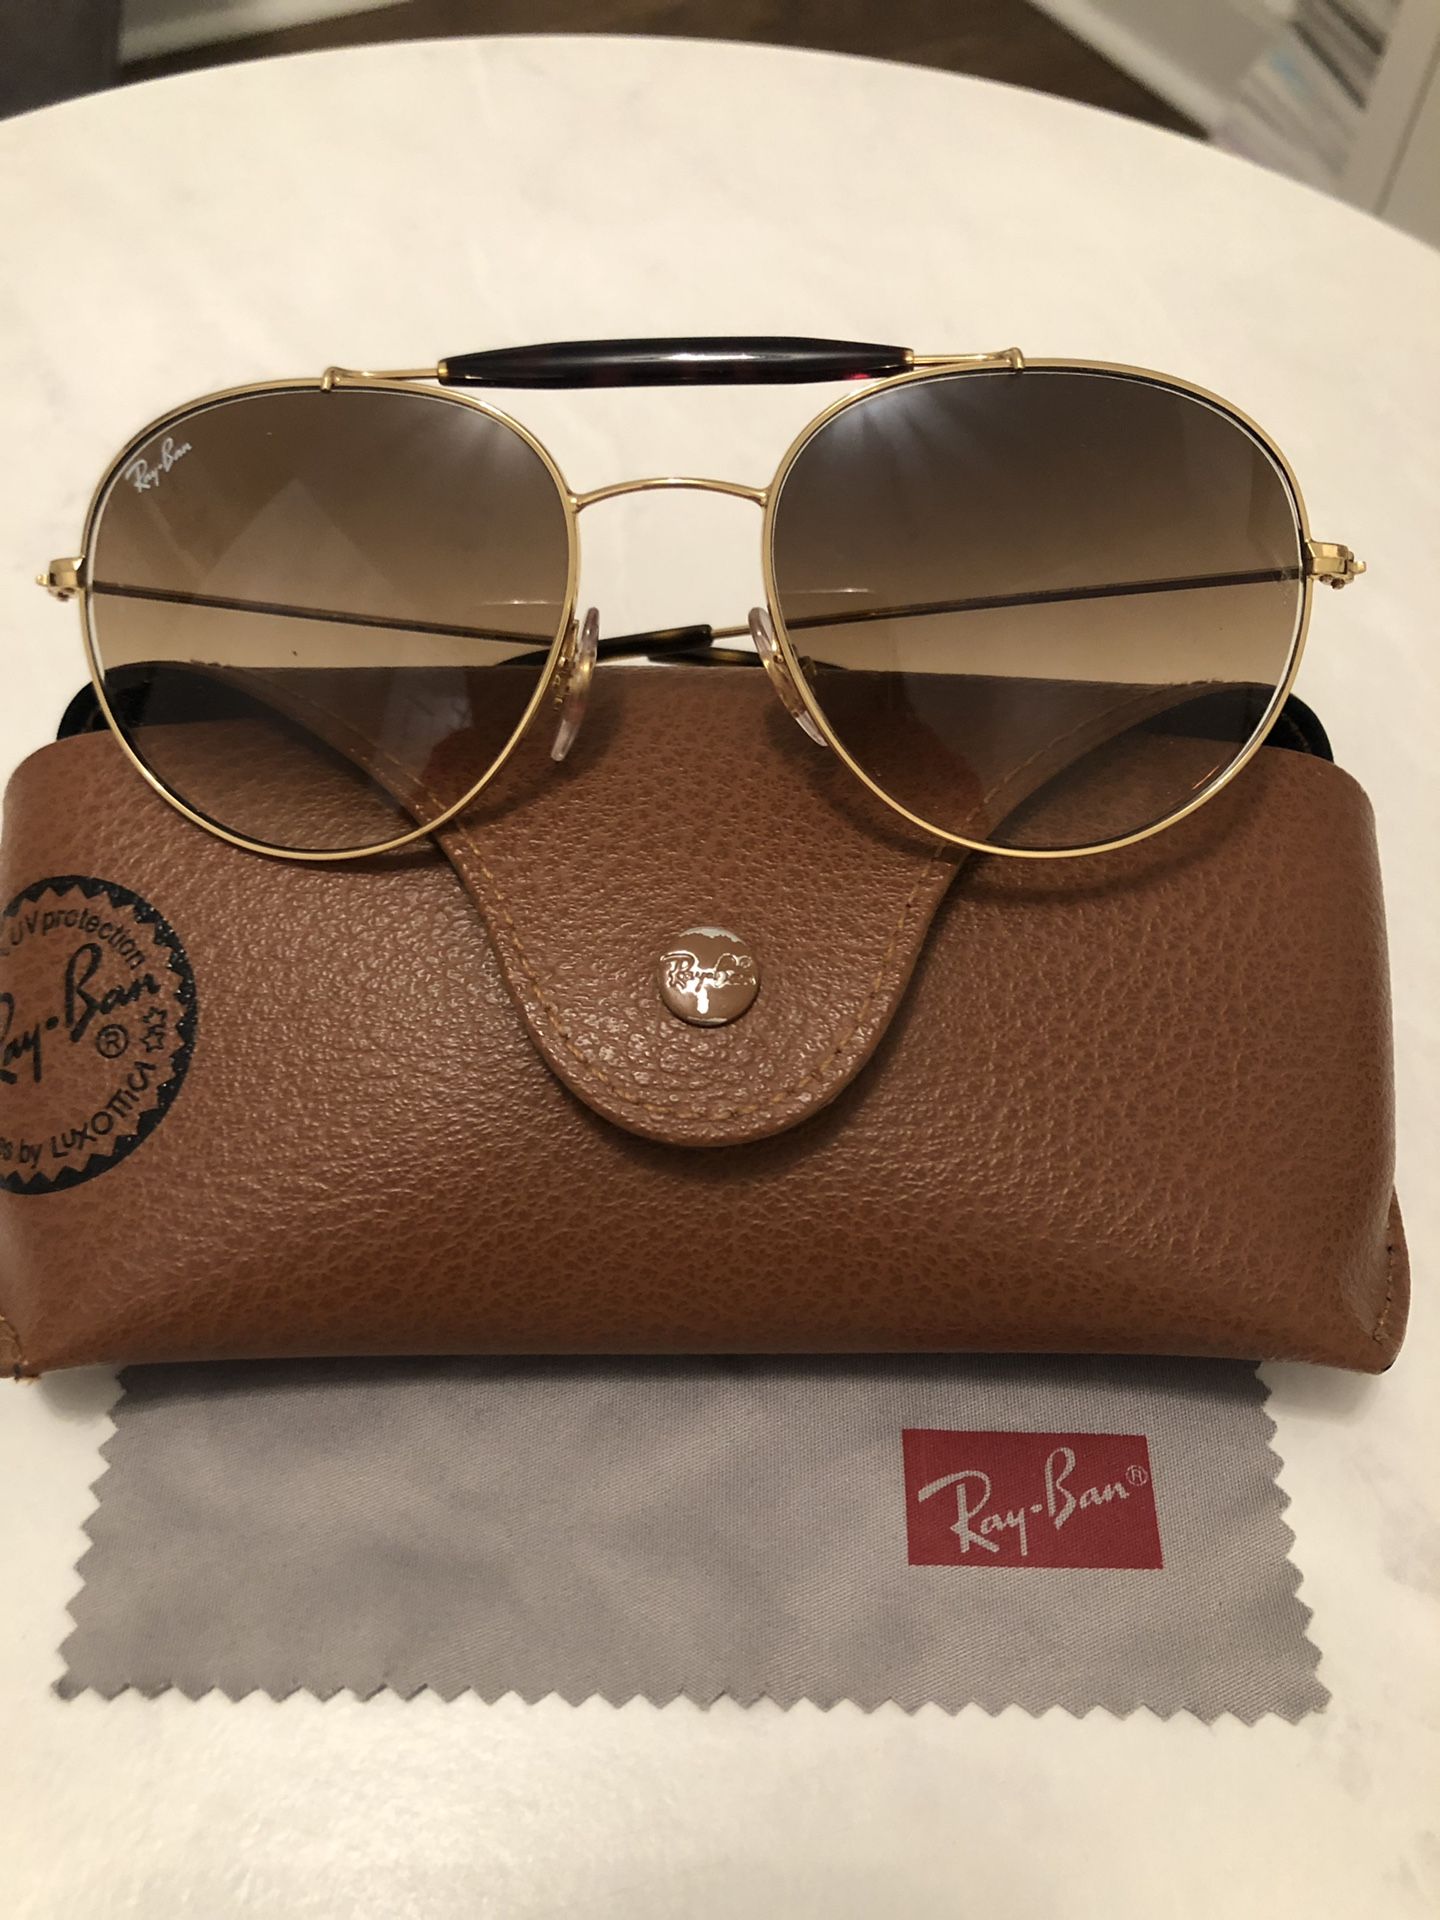 Authentic Ray-Ban Sunglass